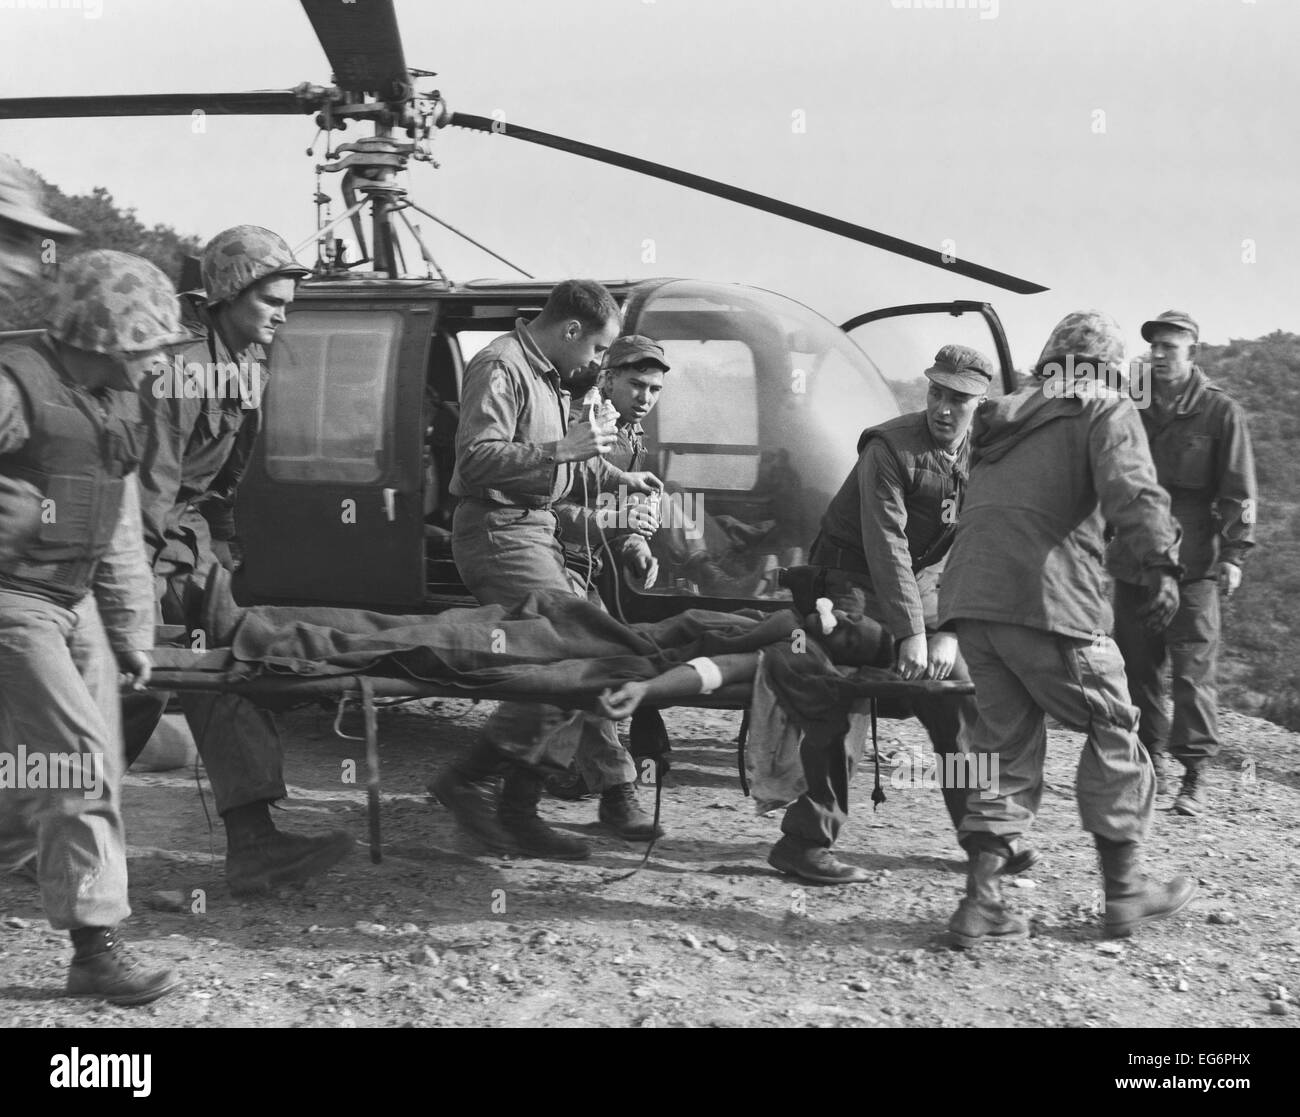 A seriously wounded U.S. Marine is rushed to helicopter by the Corpsmen. He will receive emergency treatment at an aid station Stock Photo